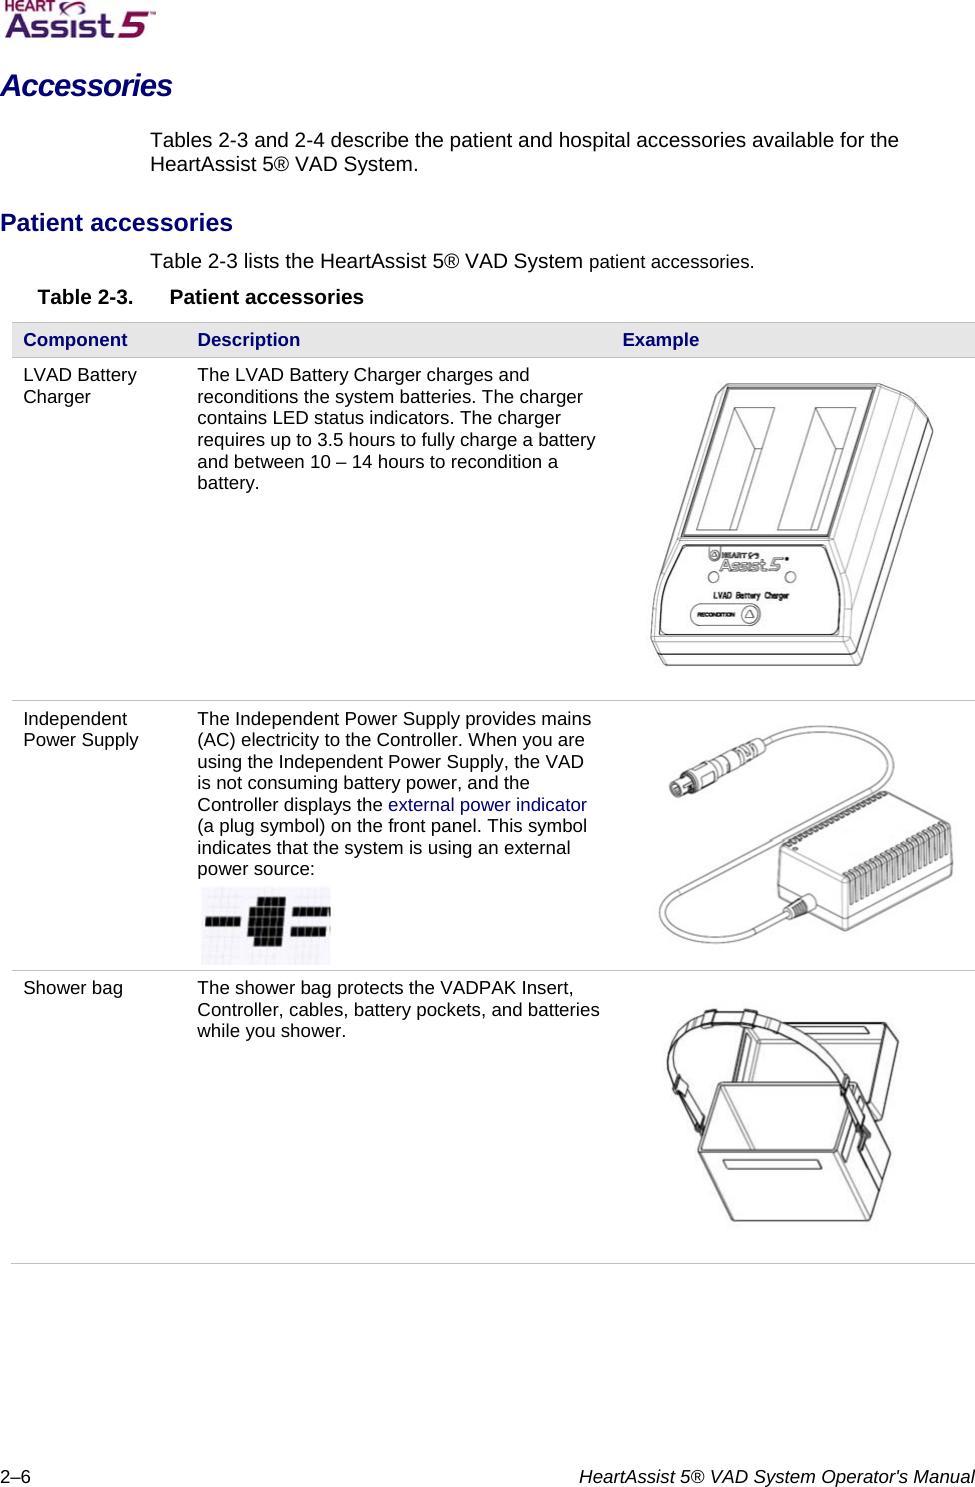   2–6  HeartAssist 5® VAD System Operator&apos;s Manual Accessories Tables 2-3 and 2-4 describe the patient and hospital accessories available for the HeartAssist 5® VAD System.  Patient accessories  Table 2-3 lists the HeartAssist 5® VAD System patient accessories.  Table 2-3.  Patient accessories  Component  Description  Example LVAD Battery Charger   The LVAD Battery Charger charges and reconditions the system batteries. The charger contains LED status indicators. The charger requires up to 3.5 hours to fully charge a battery and between 10 – 14 hours to recondition a battery.  Independent Power Supply   The Independent Power Supply provides mains (AC) electricity to the Controller. When you are using the Independent Power Supply, the VAD is not consuming battery power, and the Controller displays the external power indicator (a plug symbol) on the front panel. This symbol indicates that the system is using an external power source:   Shower bag   The shower bag protects the VADPAK Insert, Controller, cables, battery pockets, and batteries while you shower.    